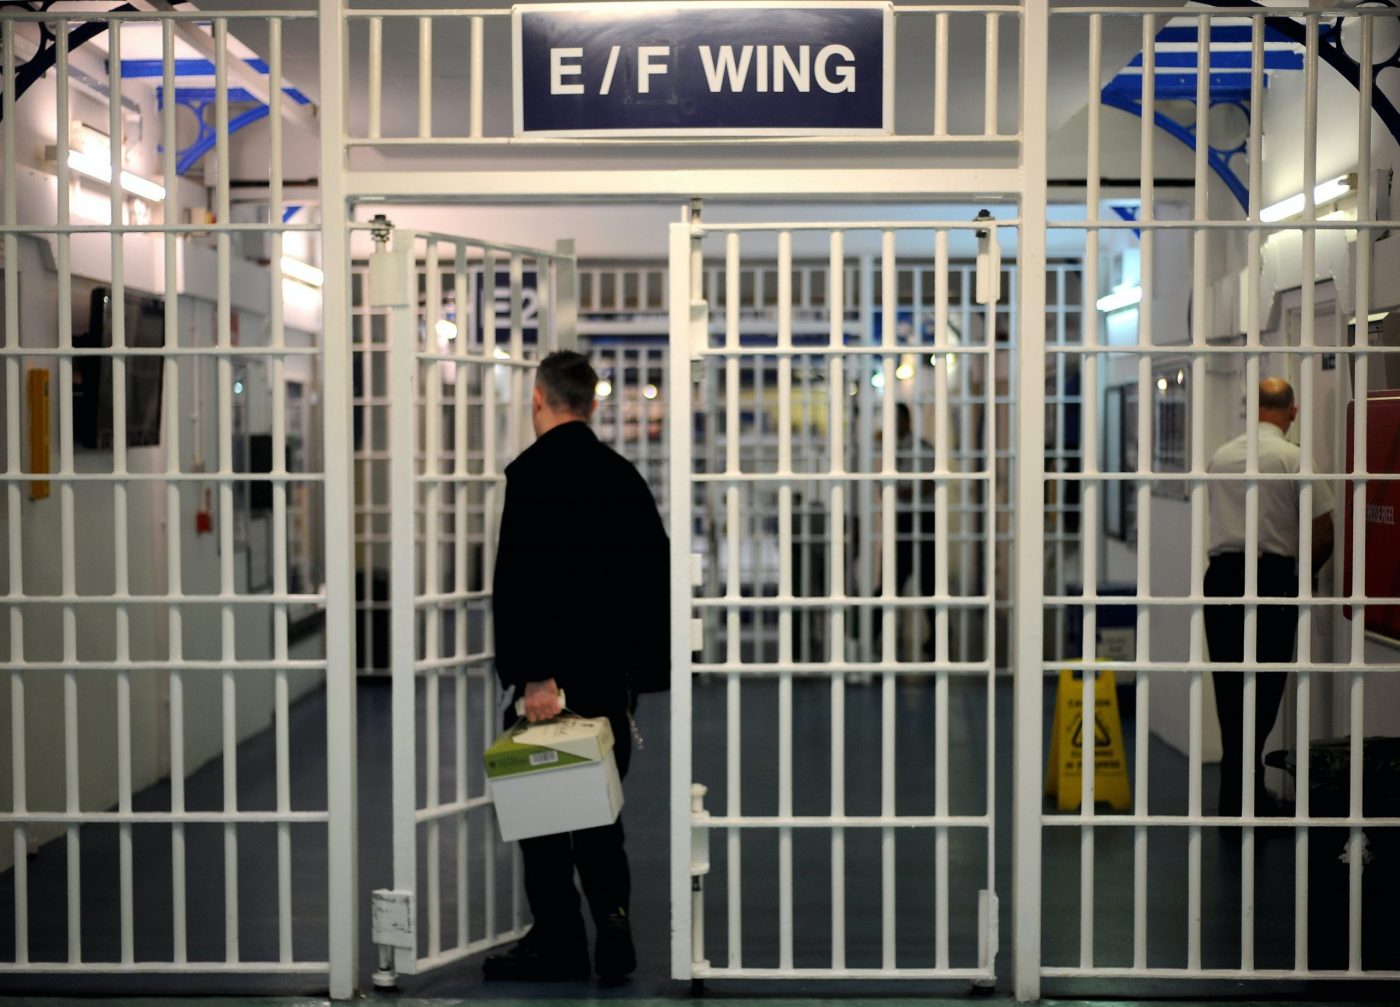 Early release scheme paused after six prisoners mistakenly freed